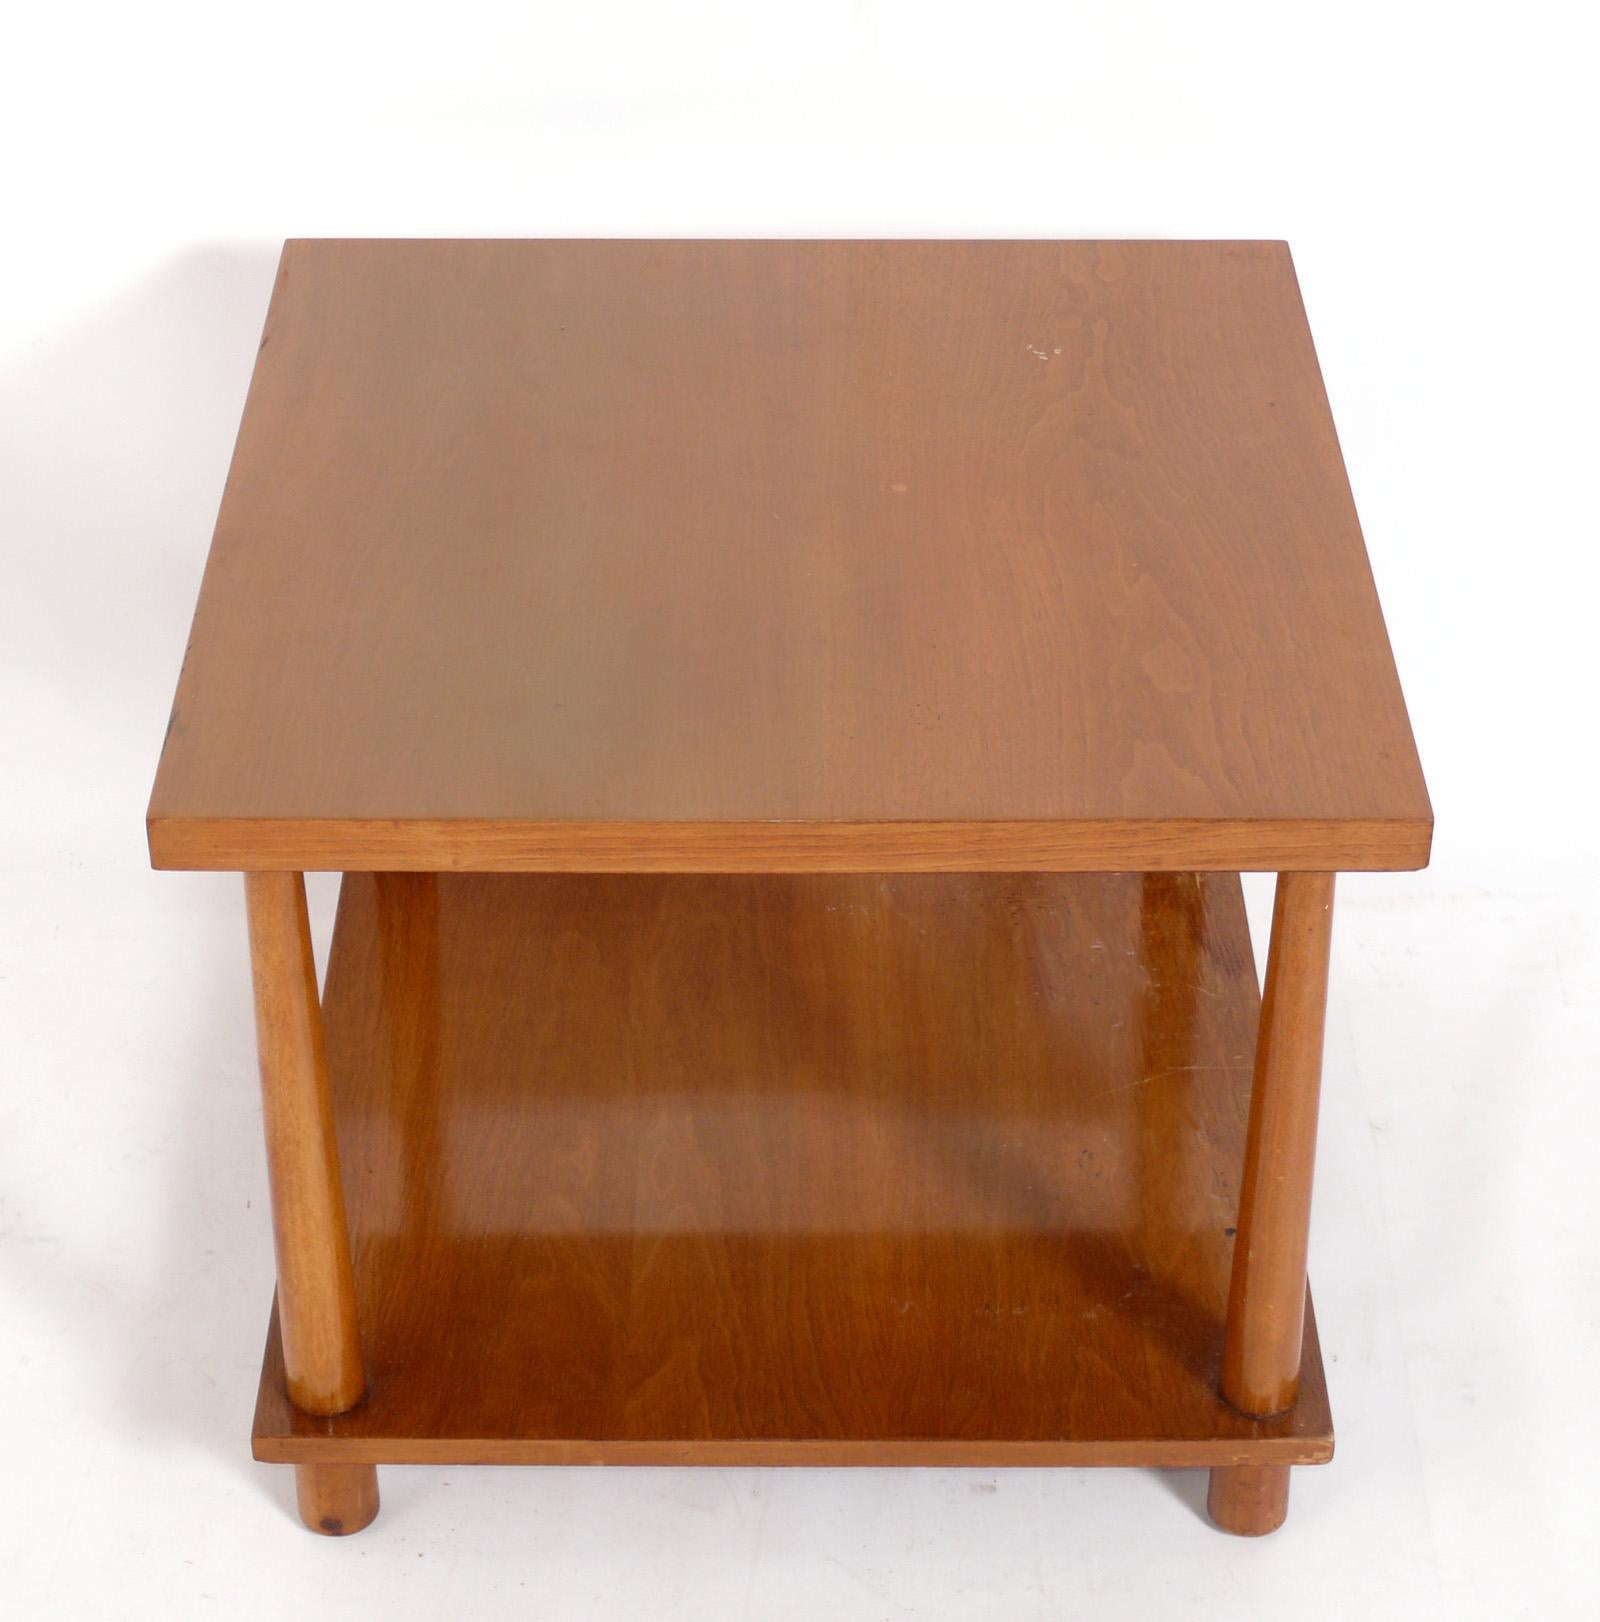 Clean Lined End or Side Table, designed by T.H. Robsjohn Gibbings for Widdicomb, American, circa 1950s. This piece is currently being refinished and can be completed in your choice of finish color. The price noted INCLUDES refinishing in your choice